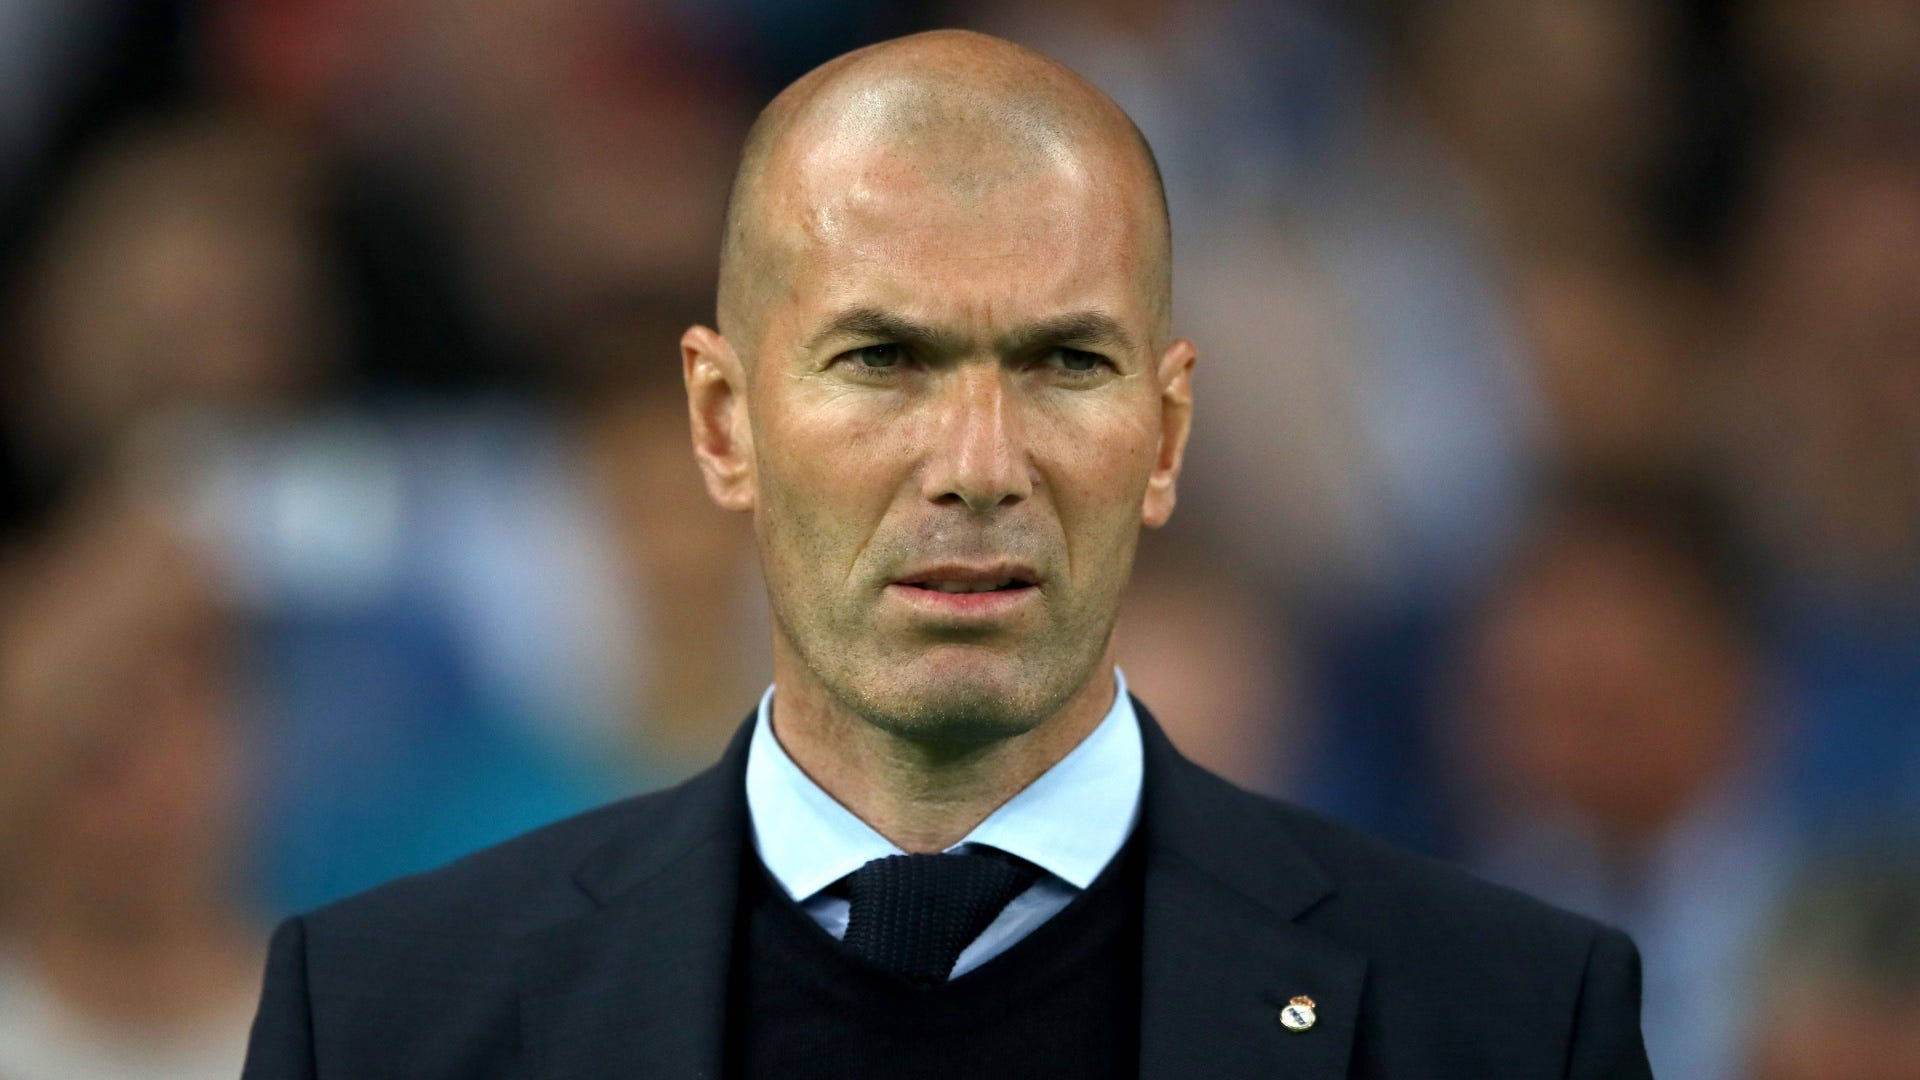 Zidane Refuses to Lead PSG After Galtier's Resignation